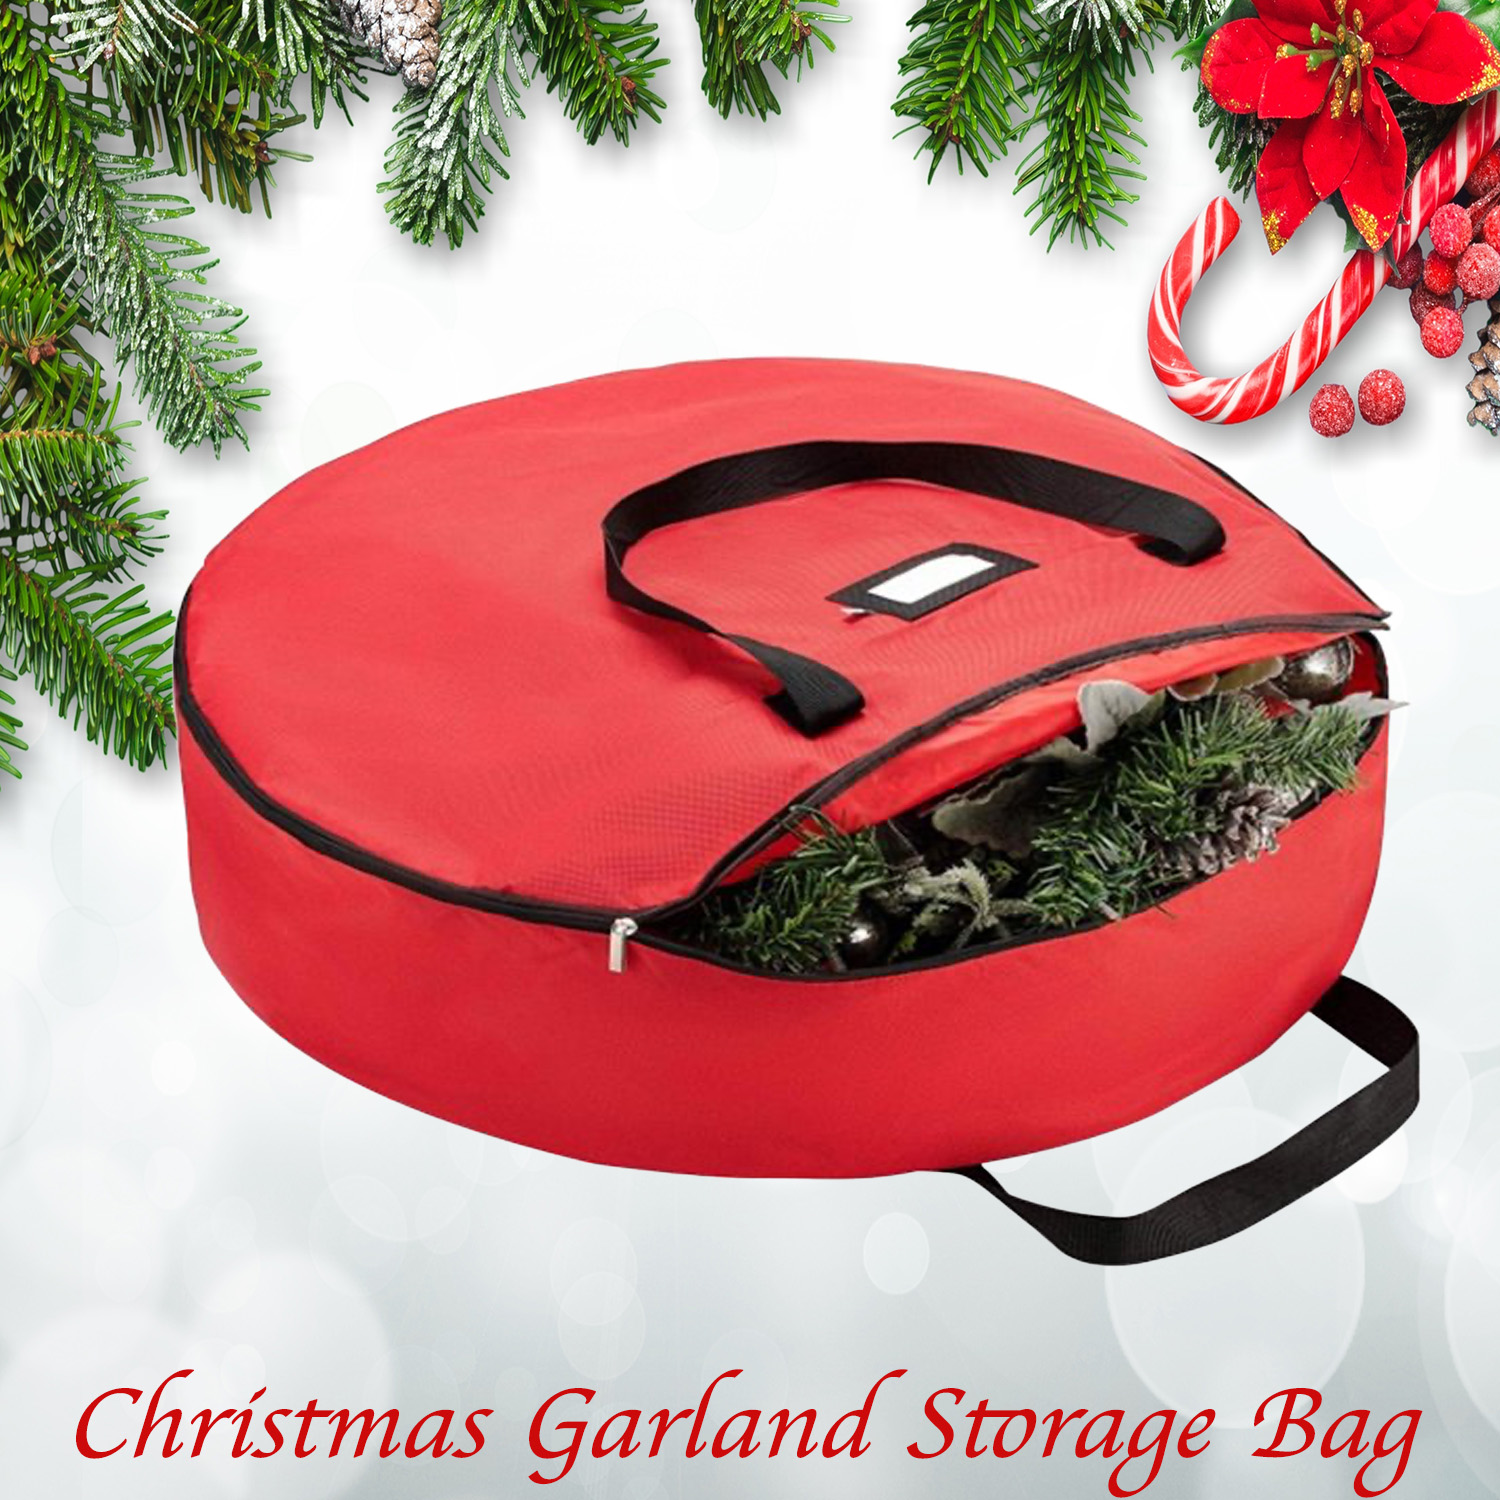  Christmas Wreath Storage Bag Double Zipper Xmas Bell Garland Gift Pouch With Handles Zipper Waterproof Artificial Wreath Organizer for Home